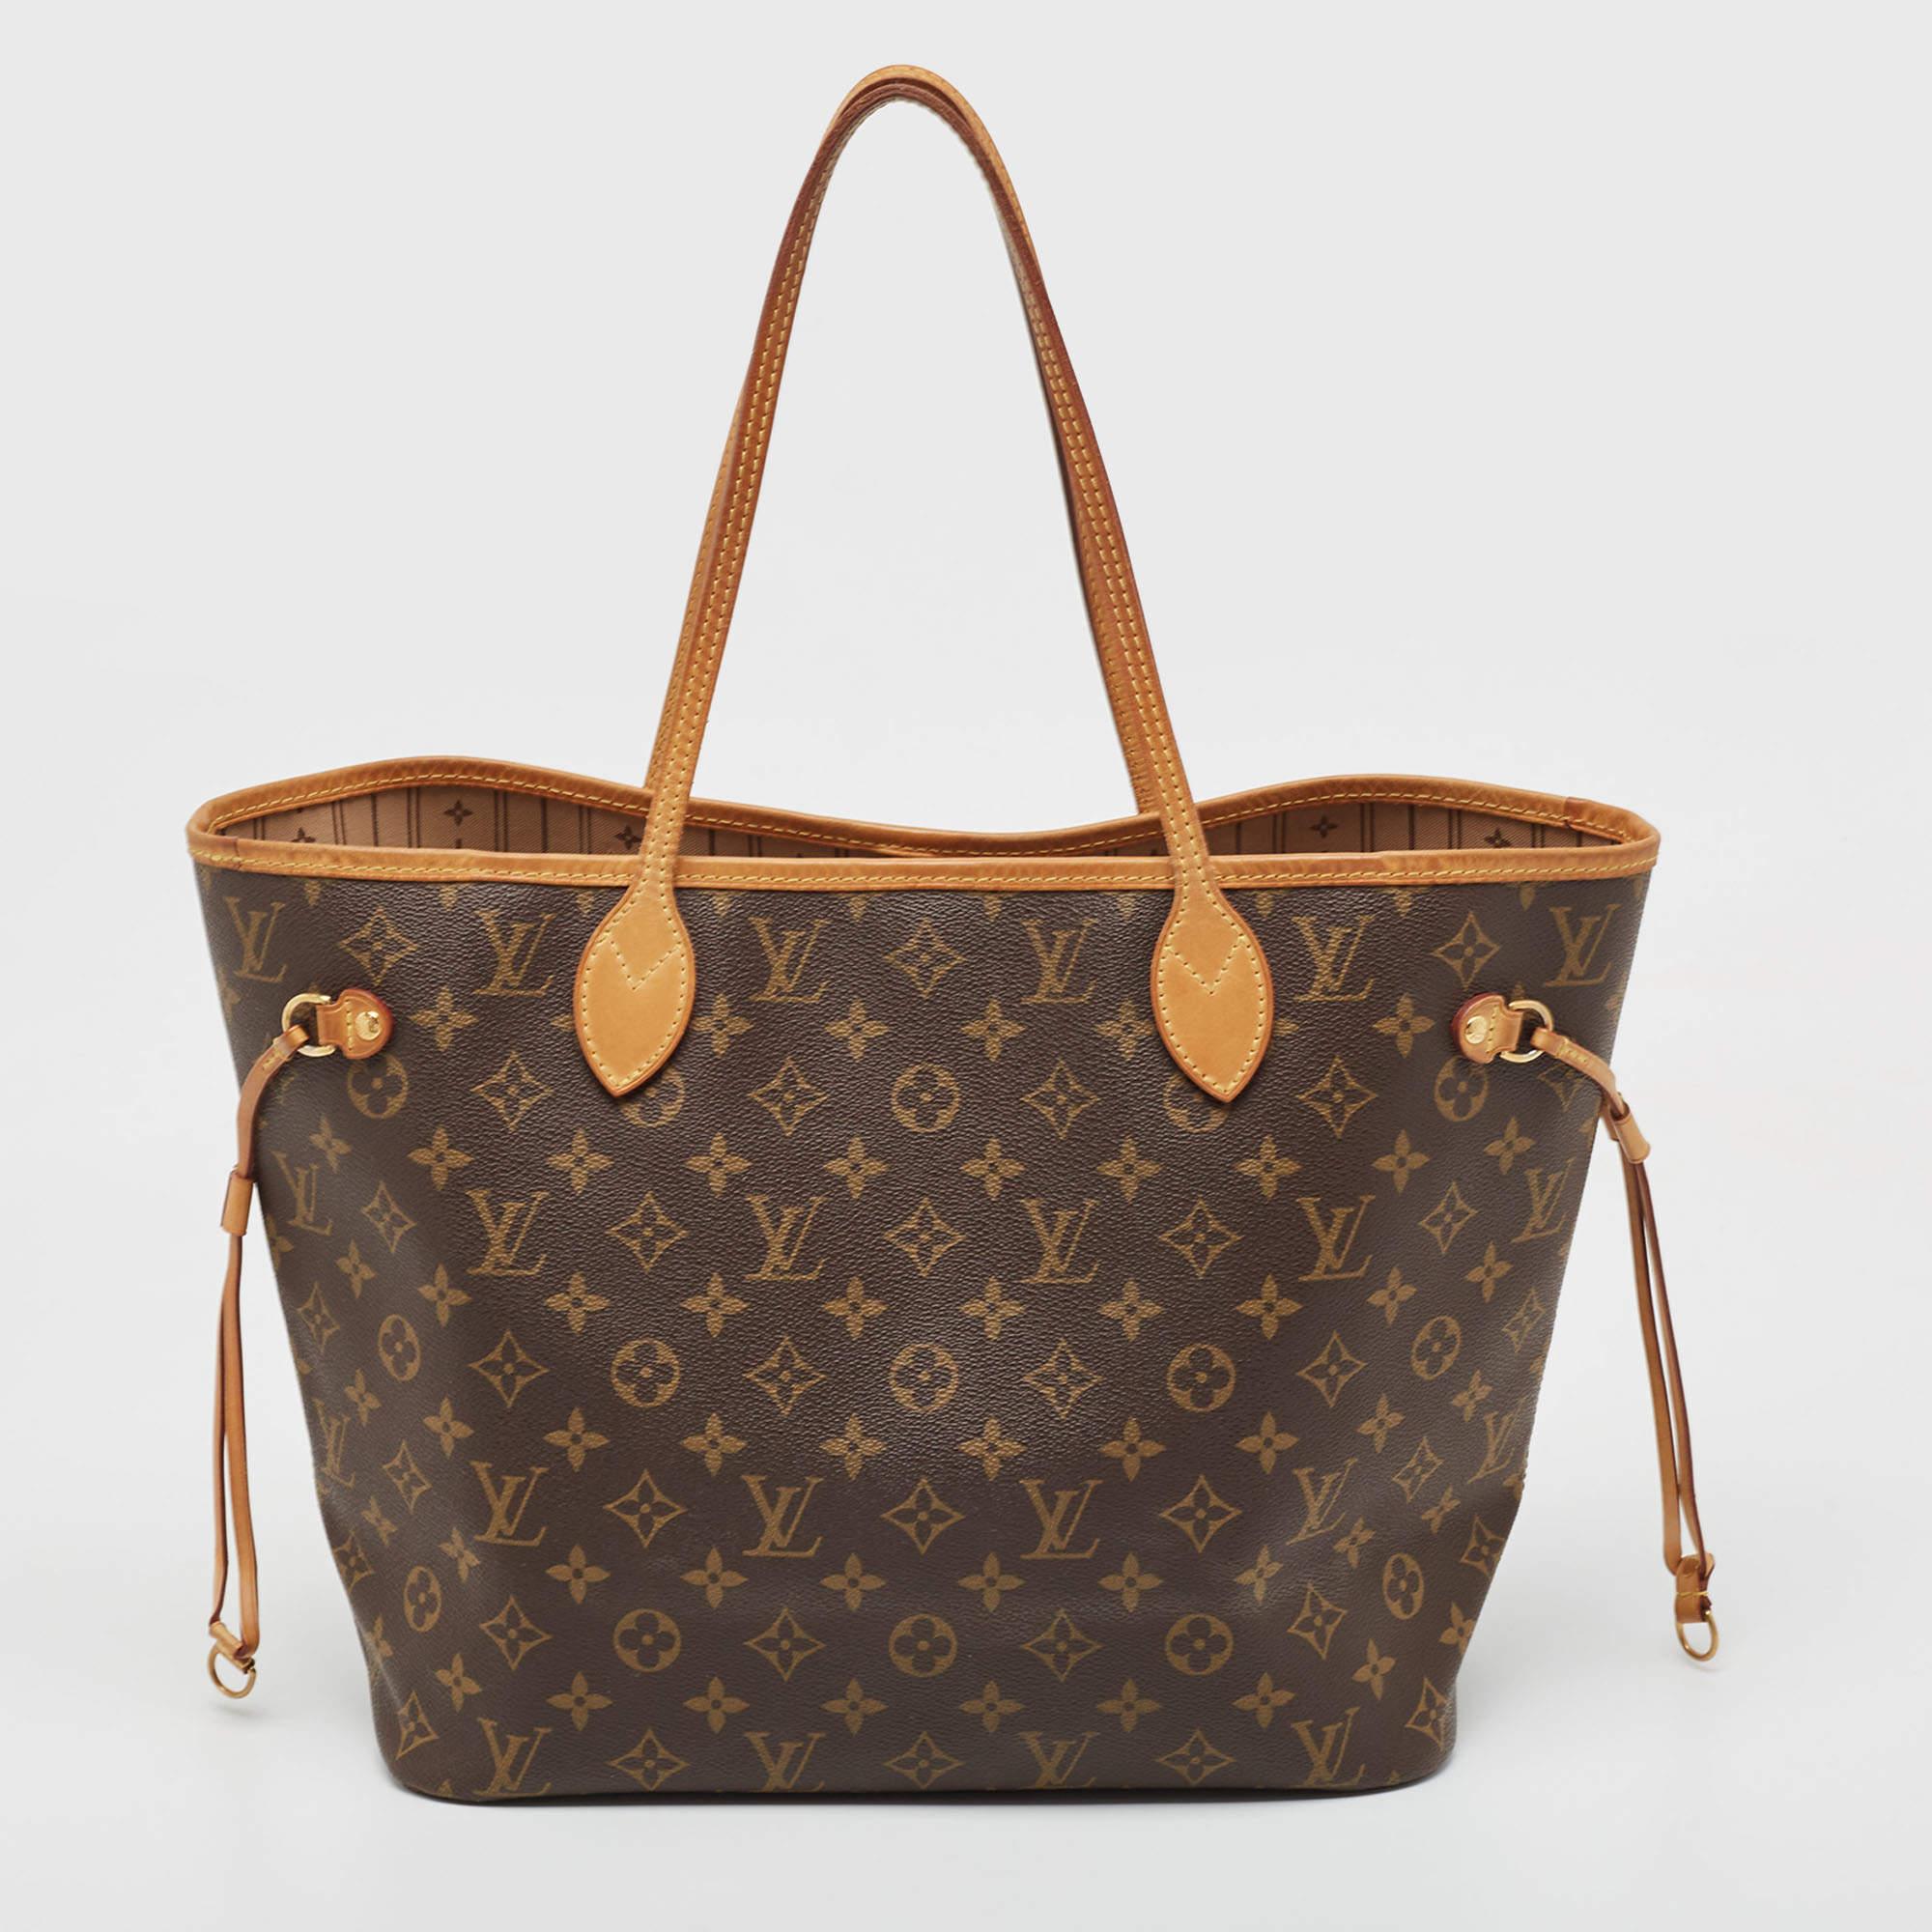 Louis Vuitton’s Neverfull was first introduced in 2007, and even today it is a popular design. Crafted from Monogram coated canvas, this Neverfull is luxurious. The bag has drawstrings on the sides, a spacious canvas interior that can house all your